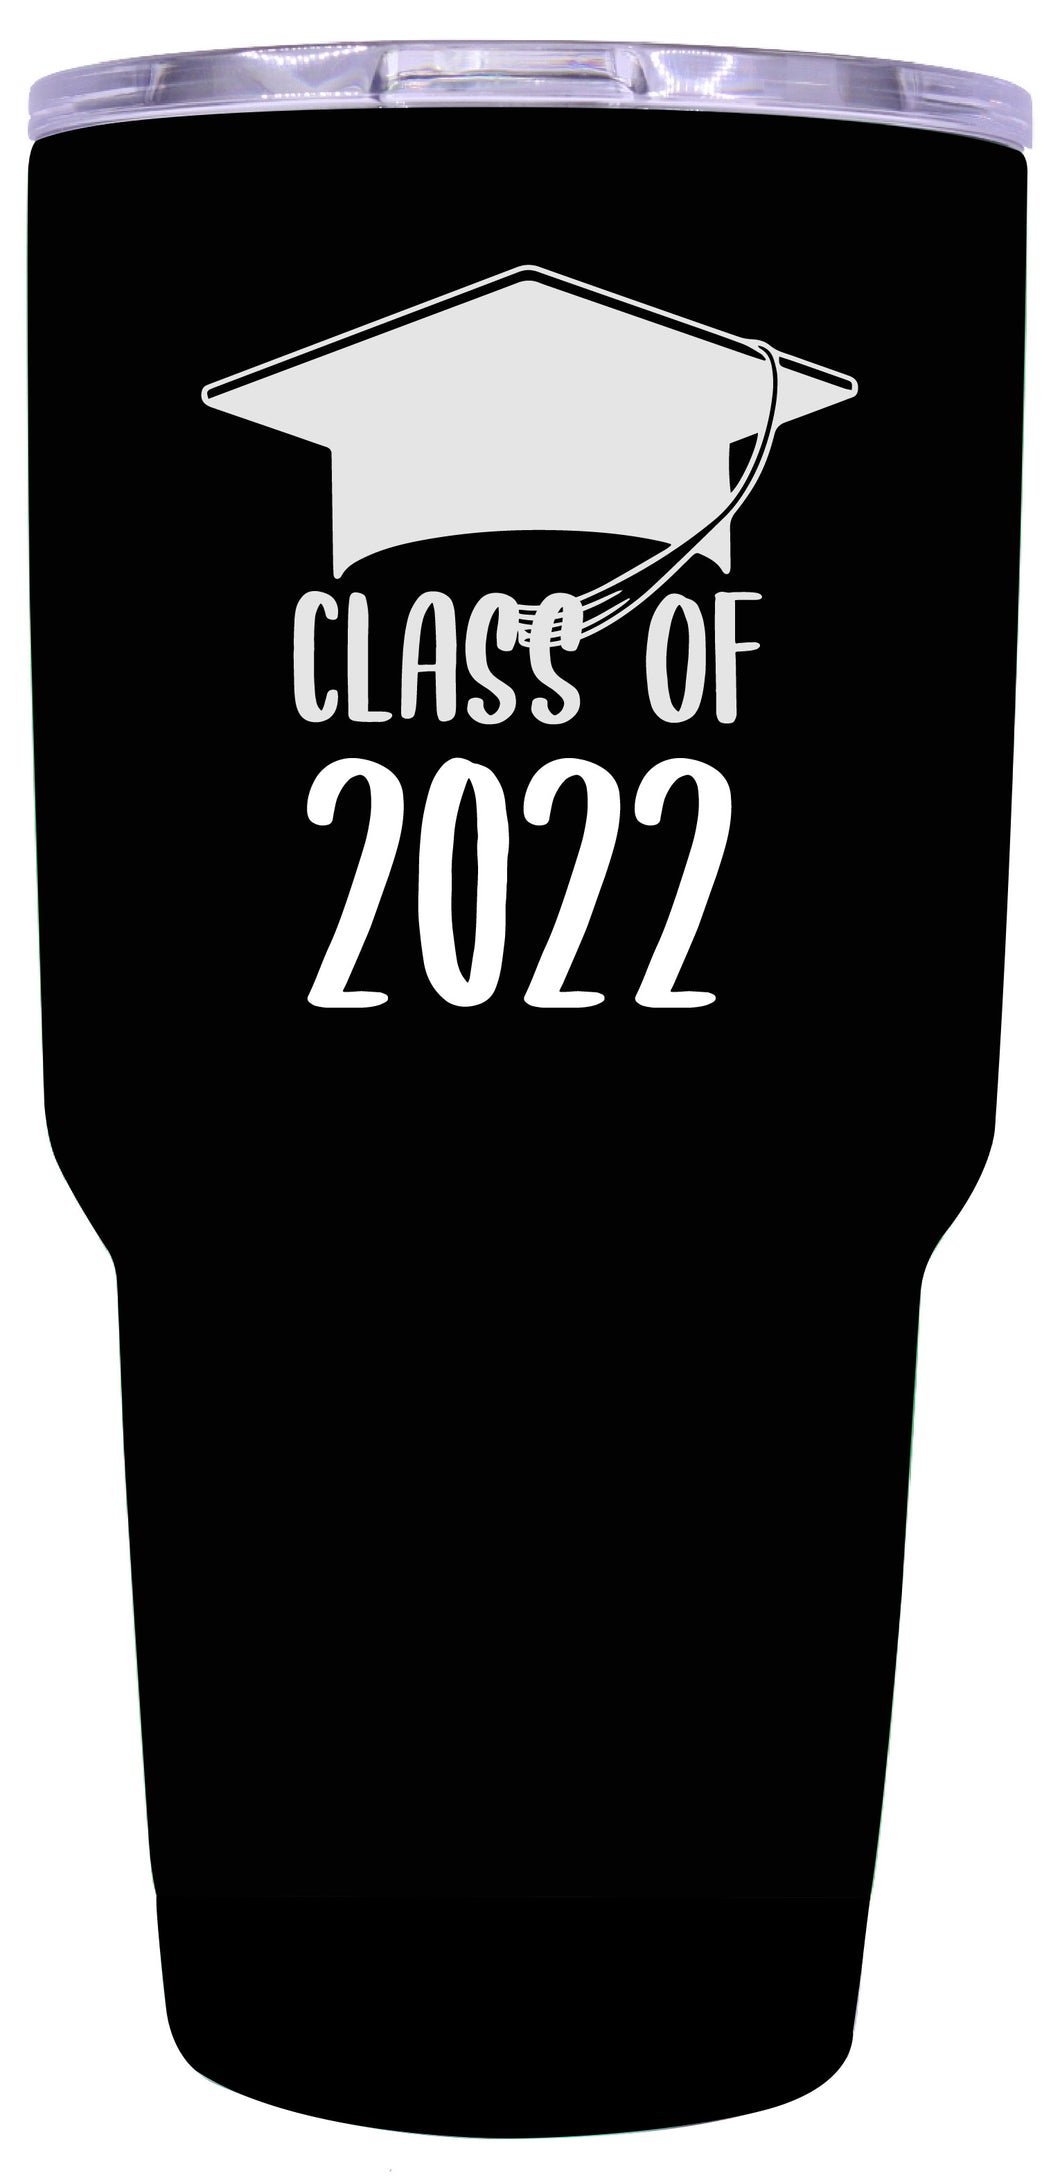 Class of 2022 Graduation 24 oz Insulated Stainless Steel Tumbler